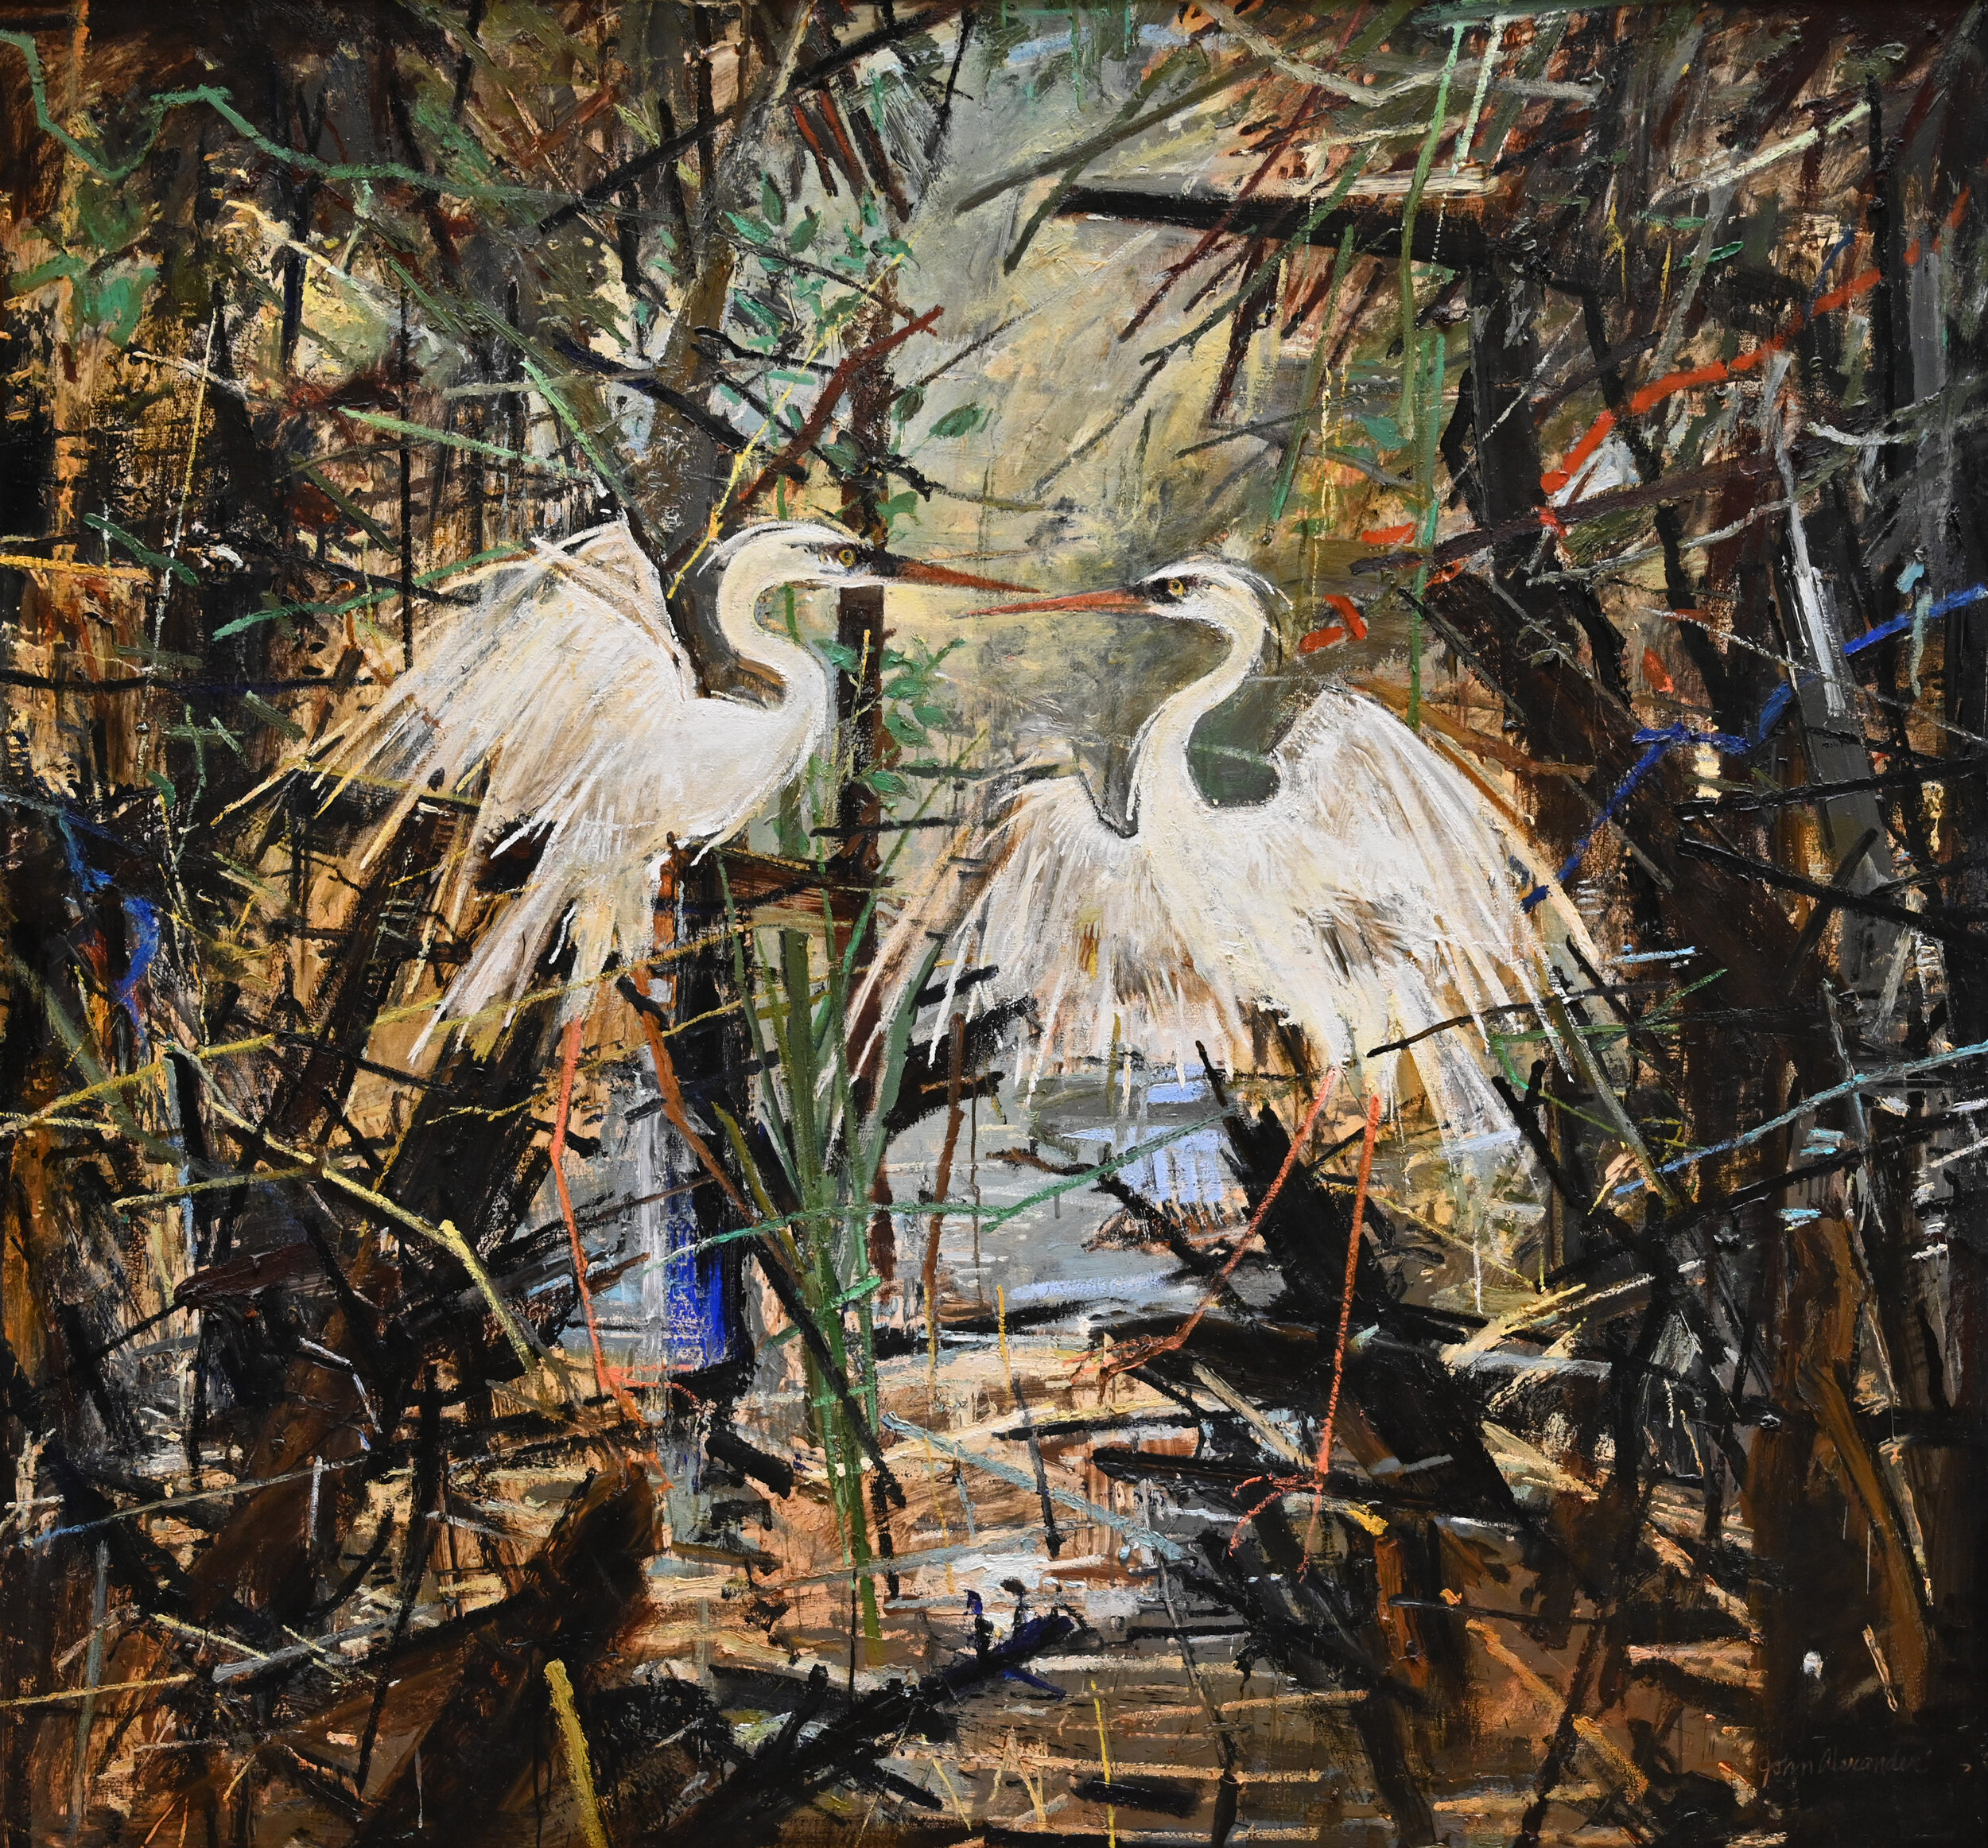   JOHN ALEXANDER  (American, b. 1945),  Herons in Heat,&nbsp; 1987, Oil on canvas, 81 x 90 inches, Courtesy of the Albritton Collection 